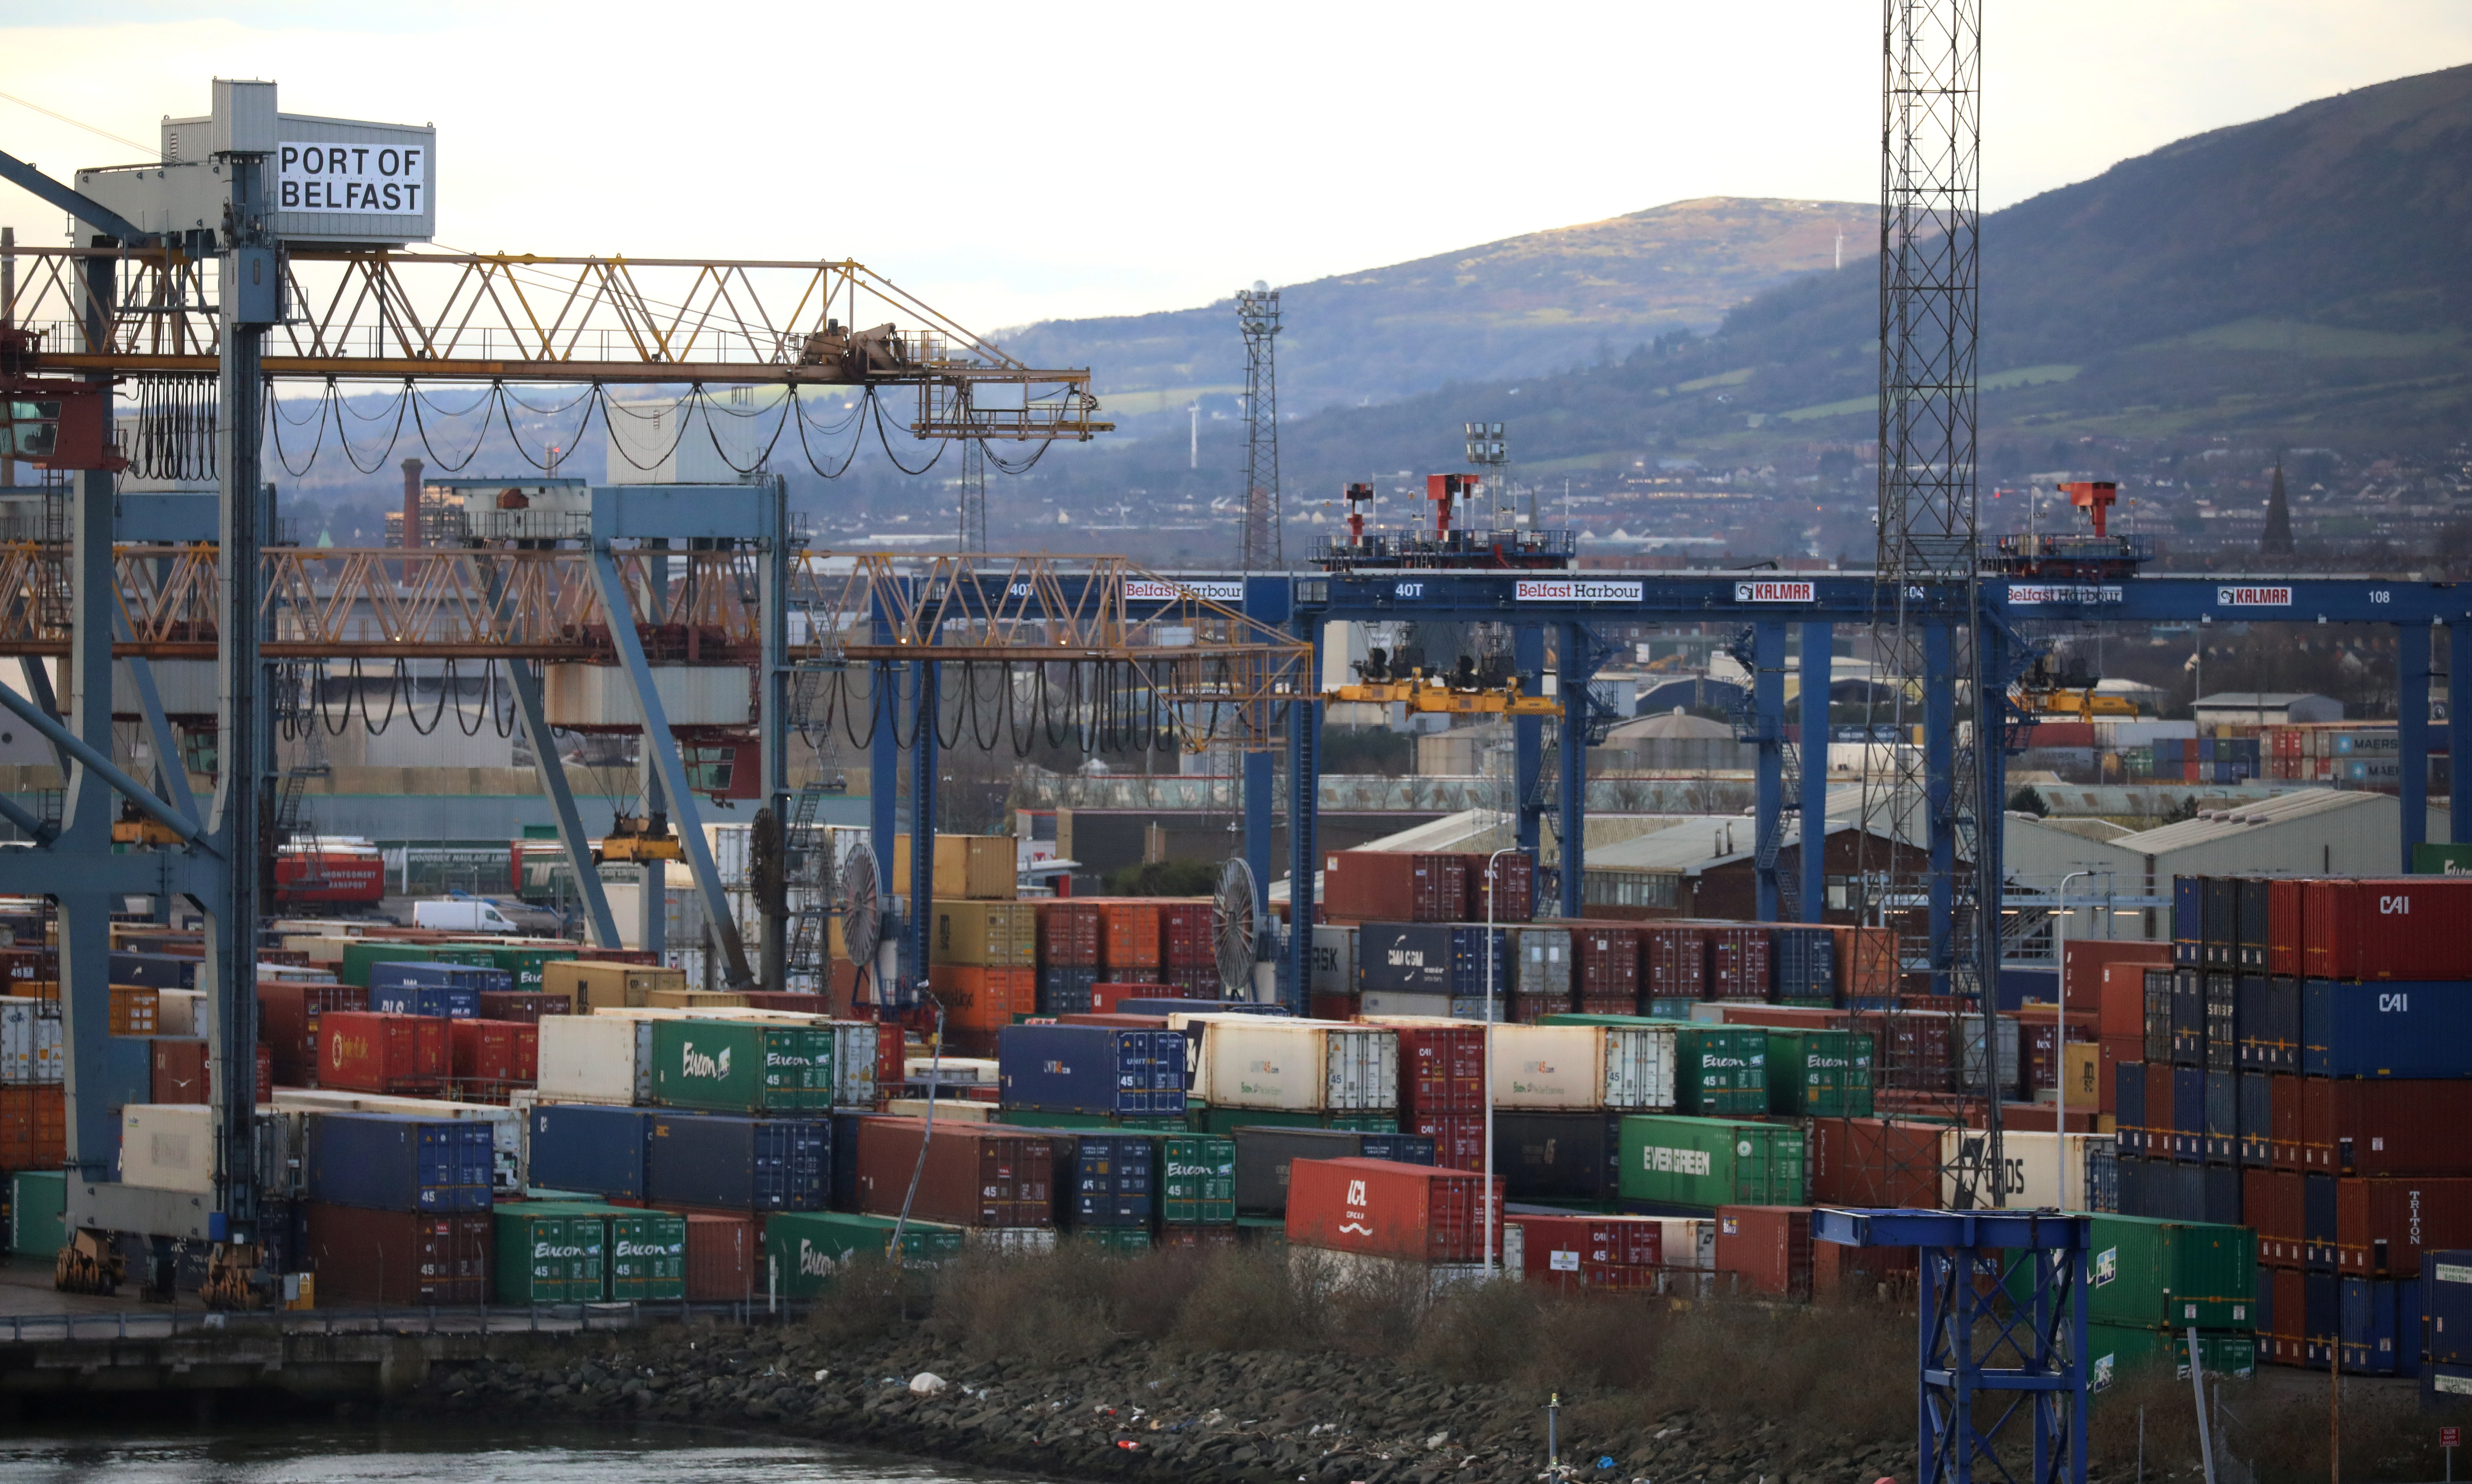 Shipping containers are seen at the Port of Belfast